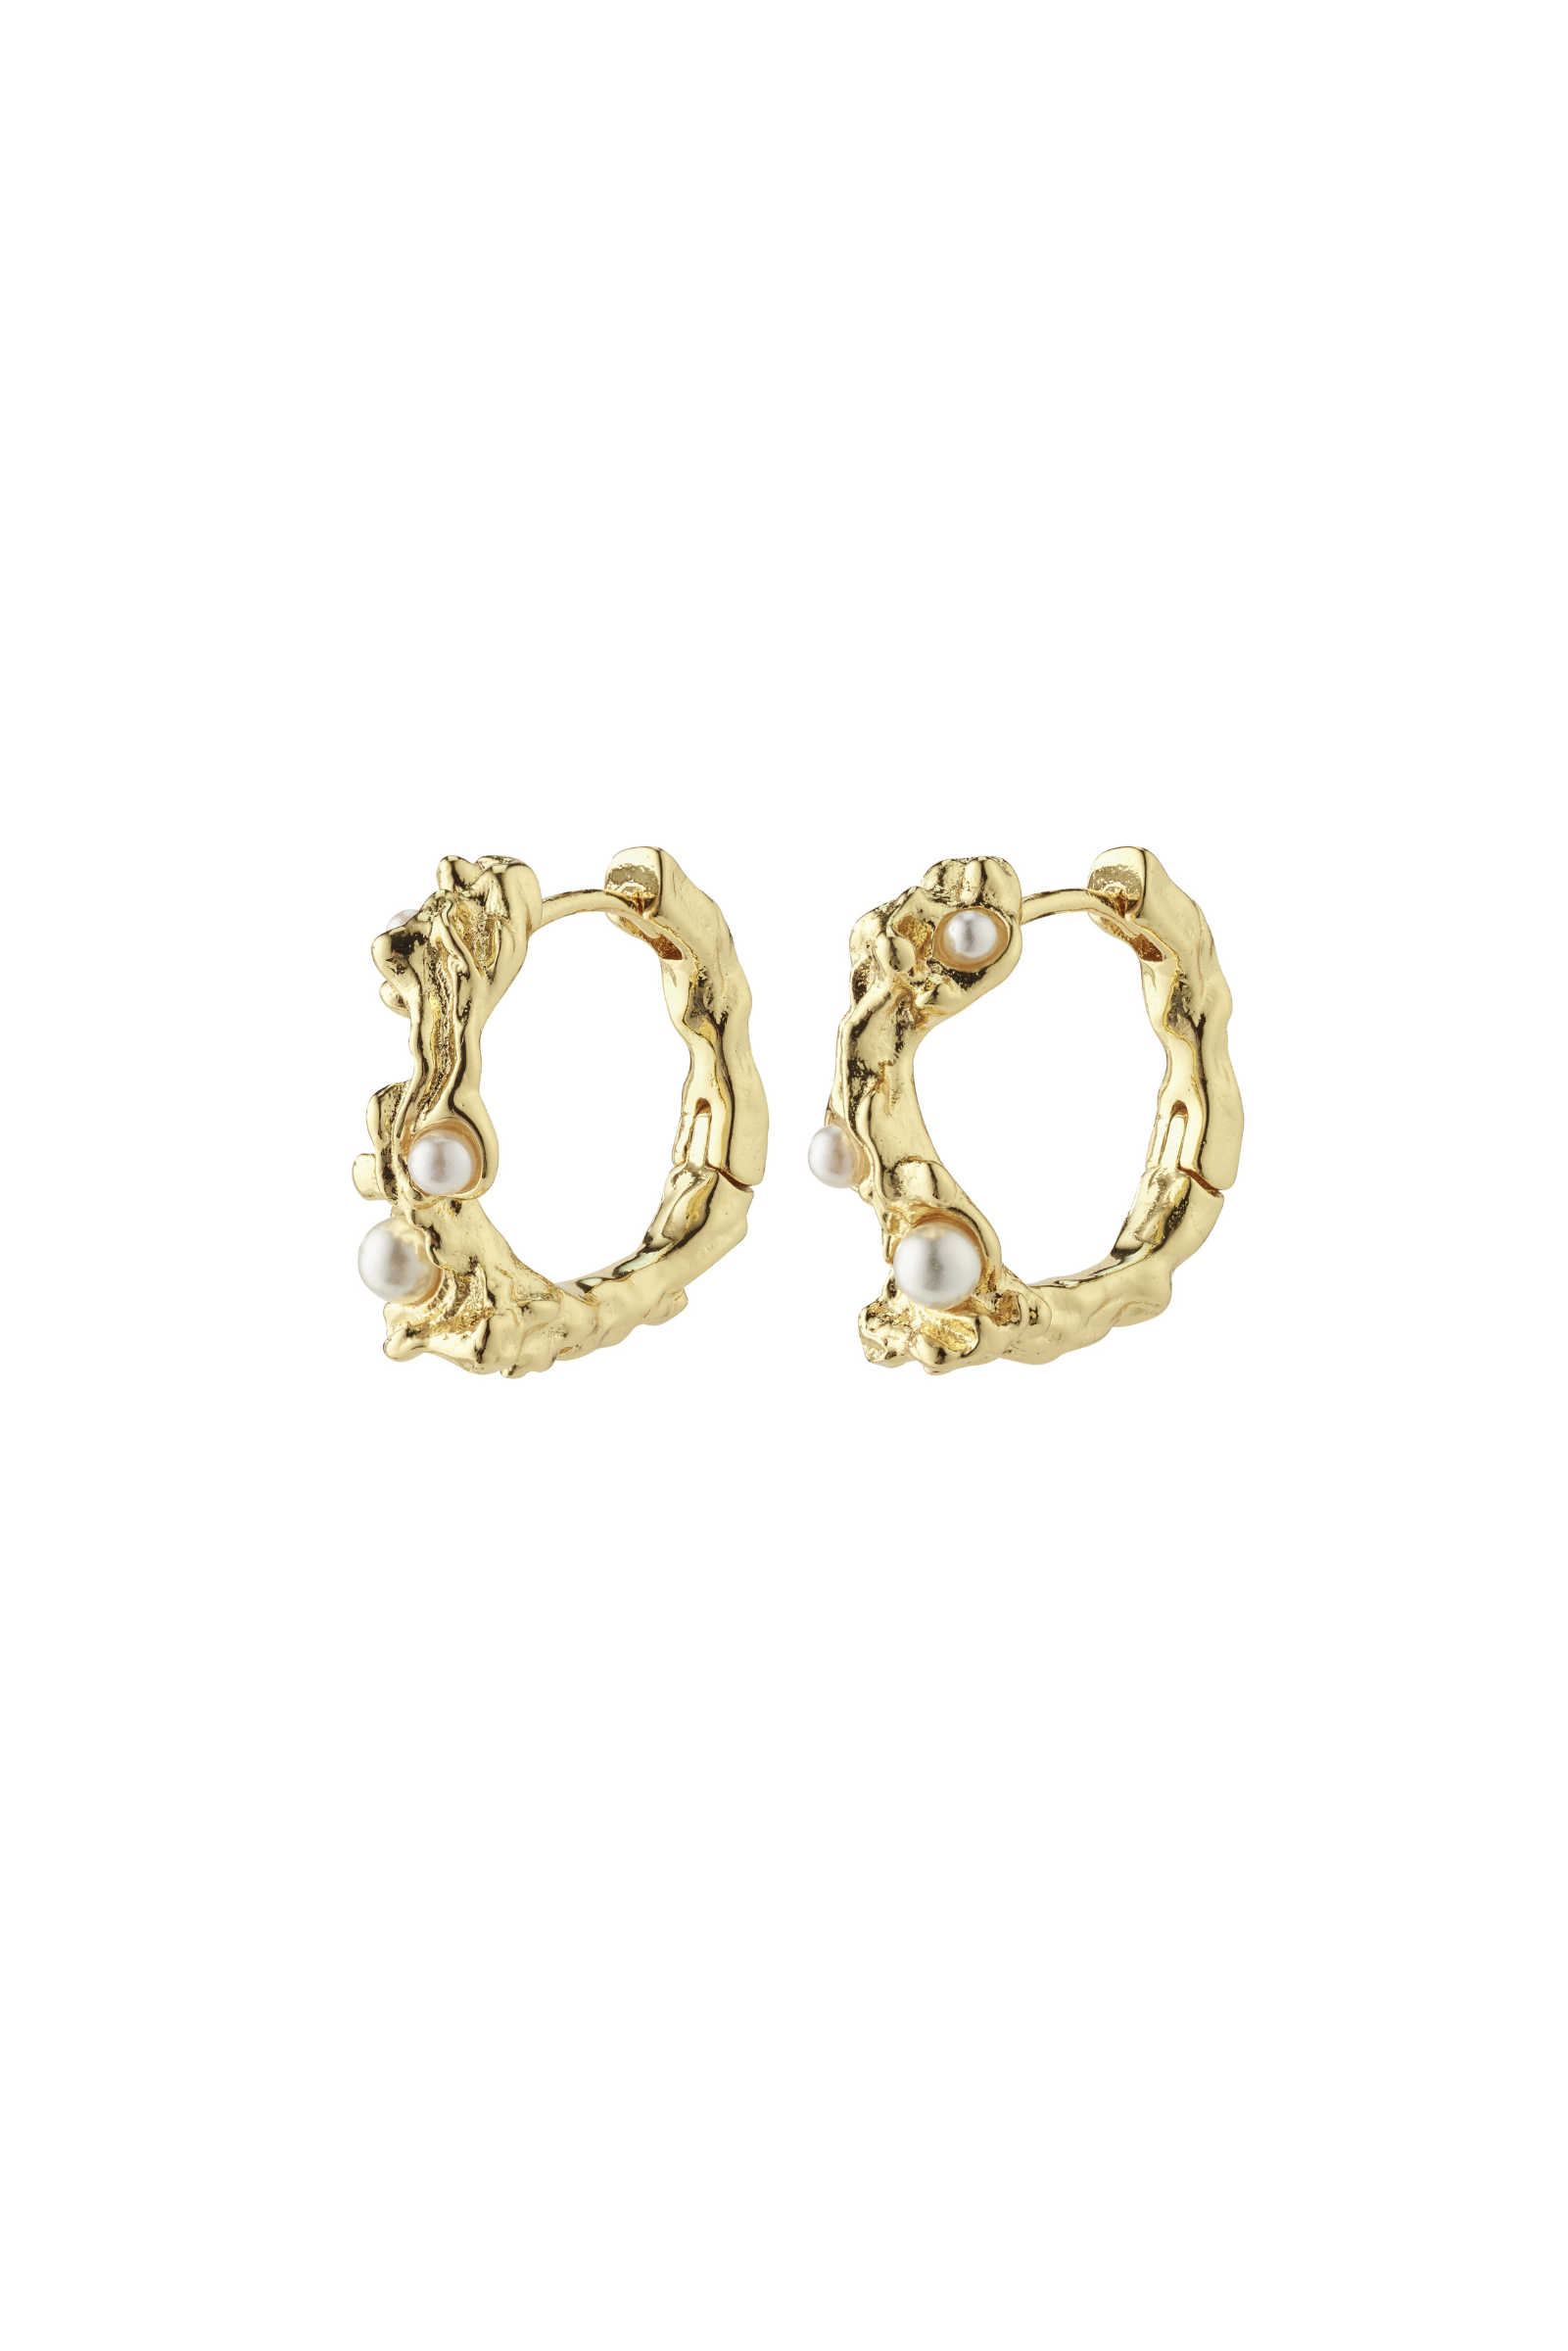 Raelynn Recycled Earrings - Gold Plated